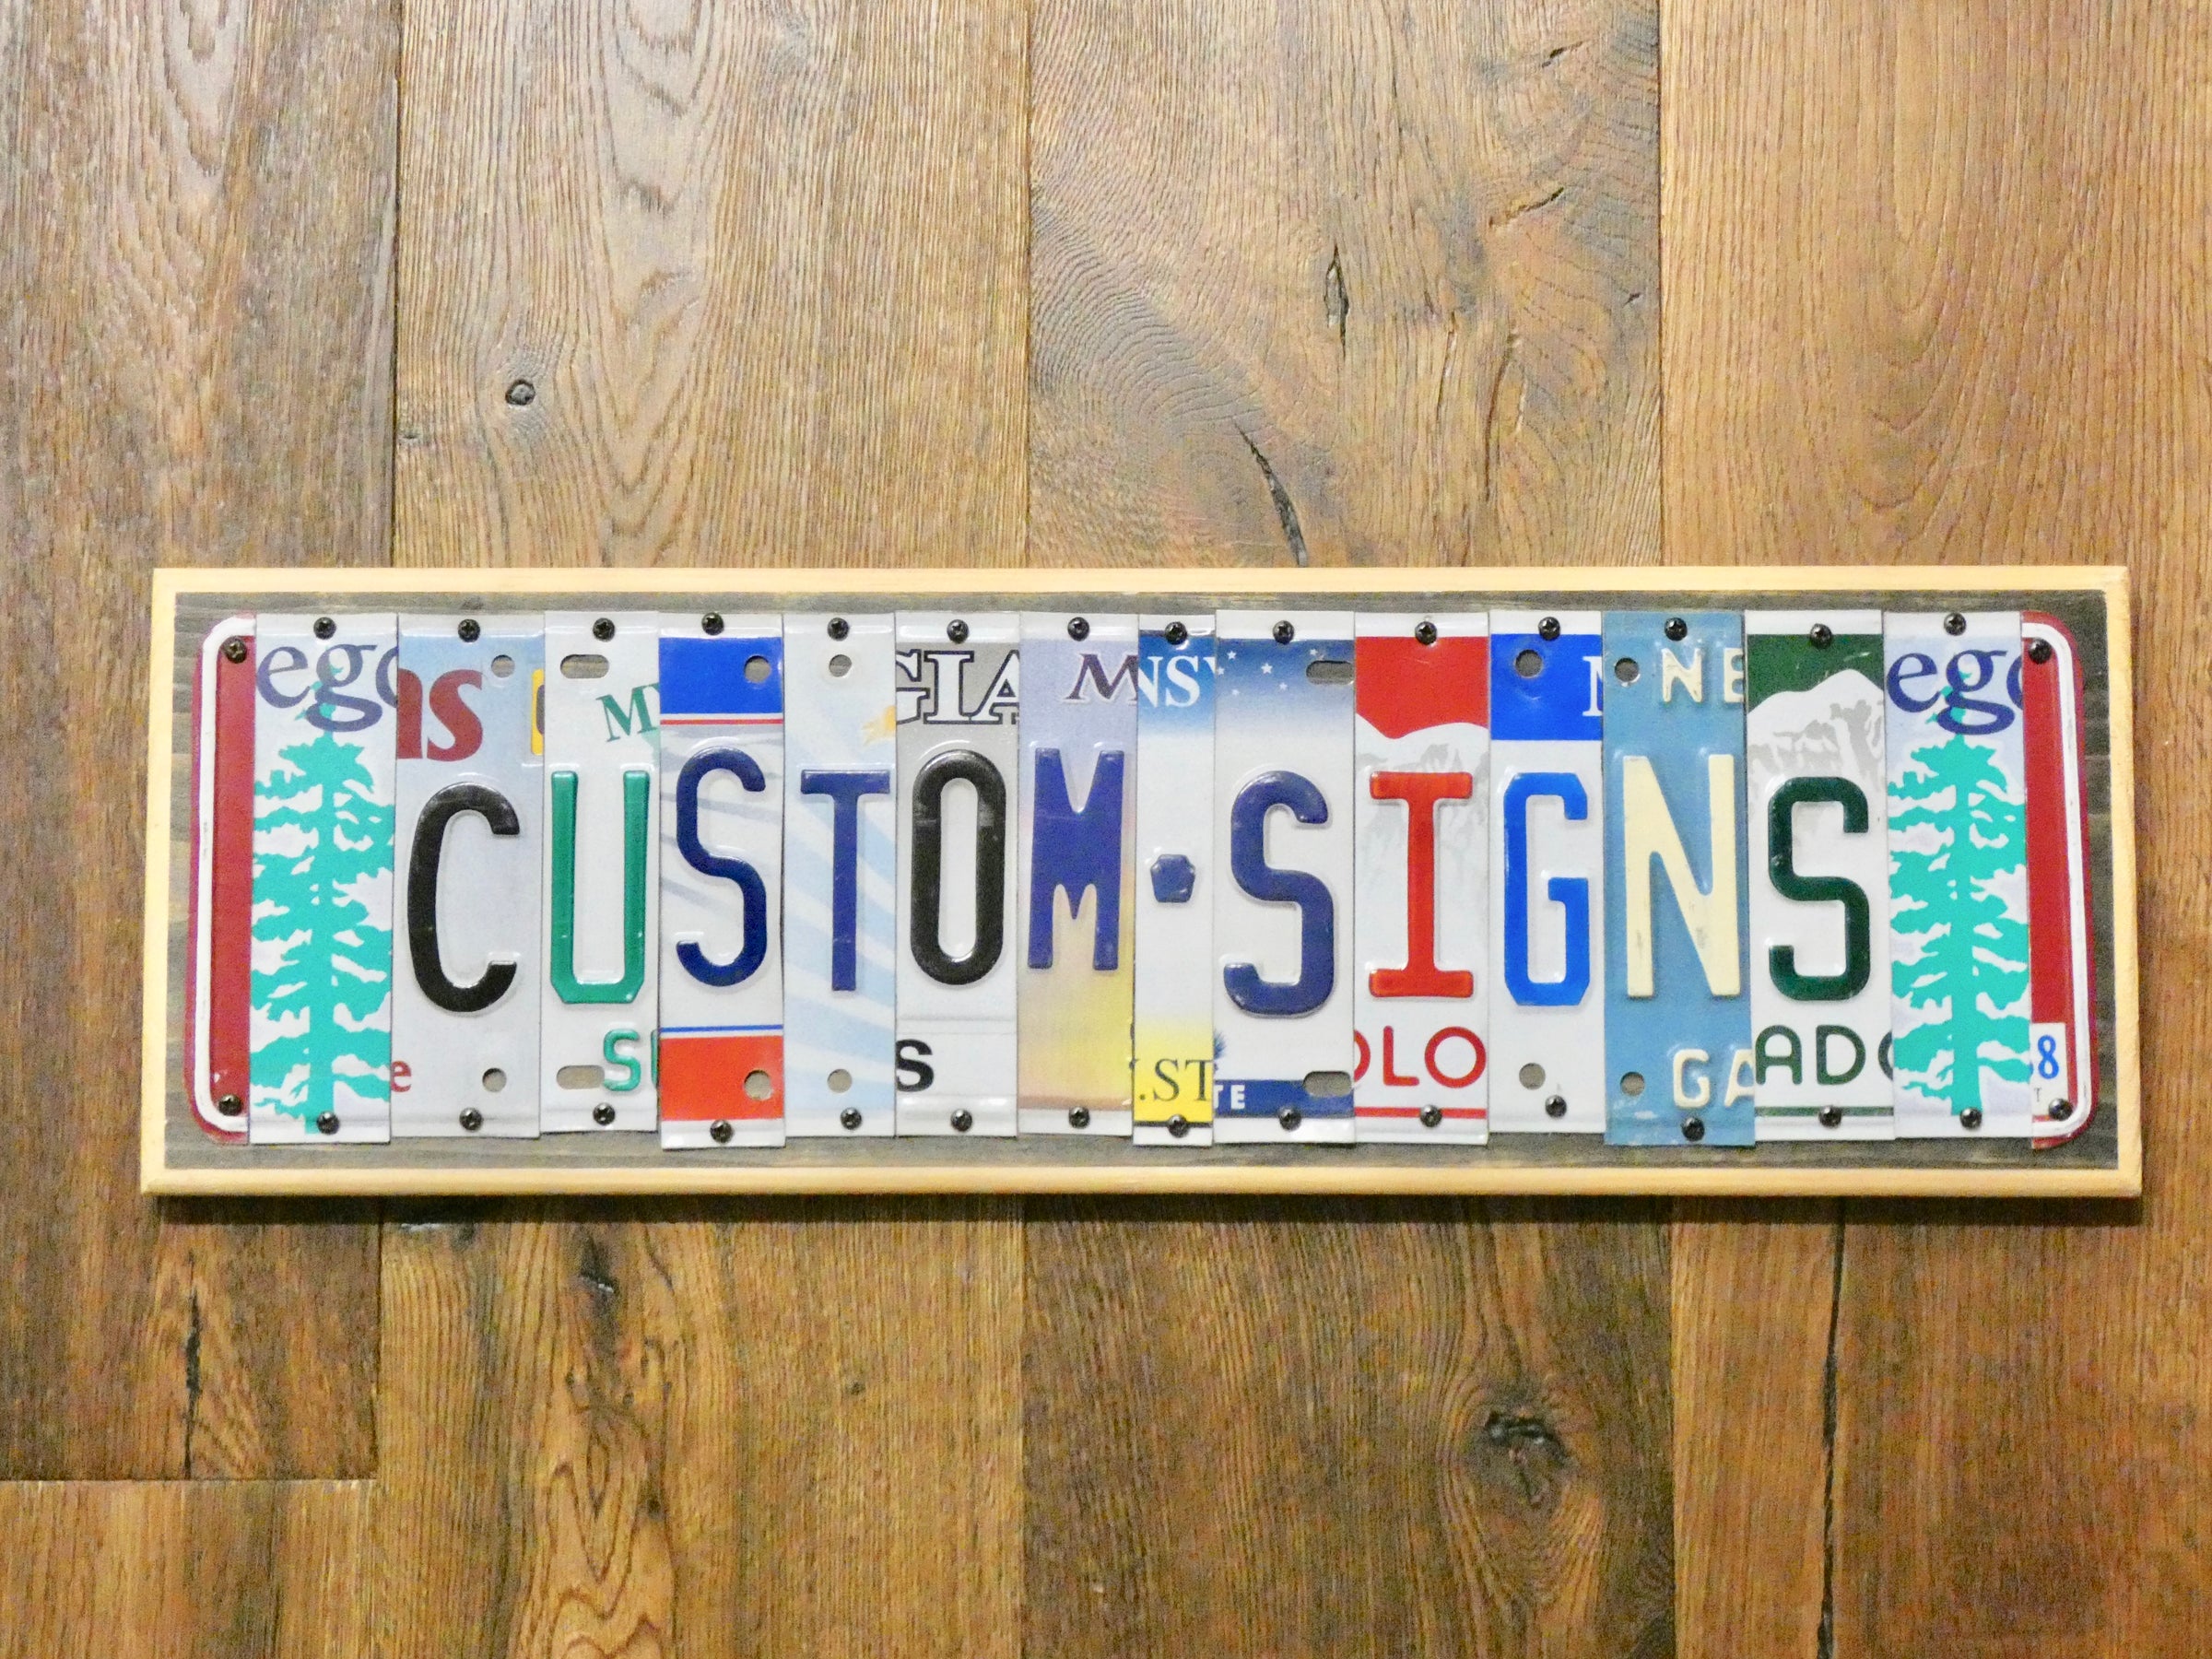 TIKI BAR Sign made with repurposed License Plates